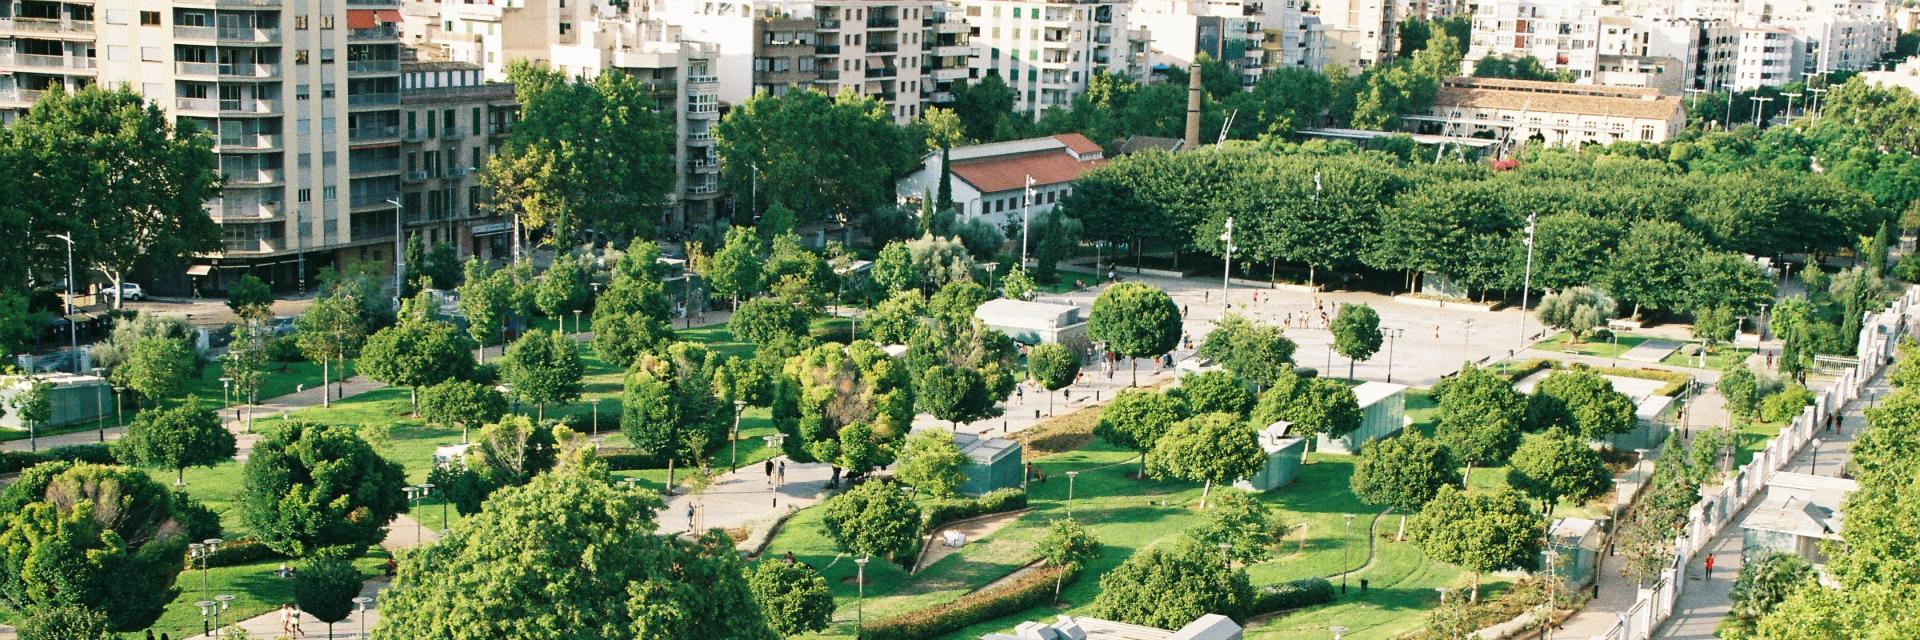 photo of a city with wide expanses of trees.